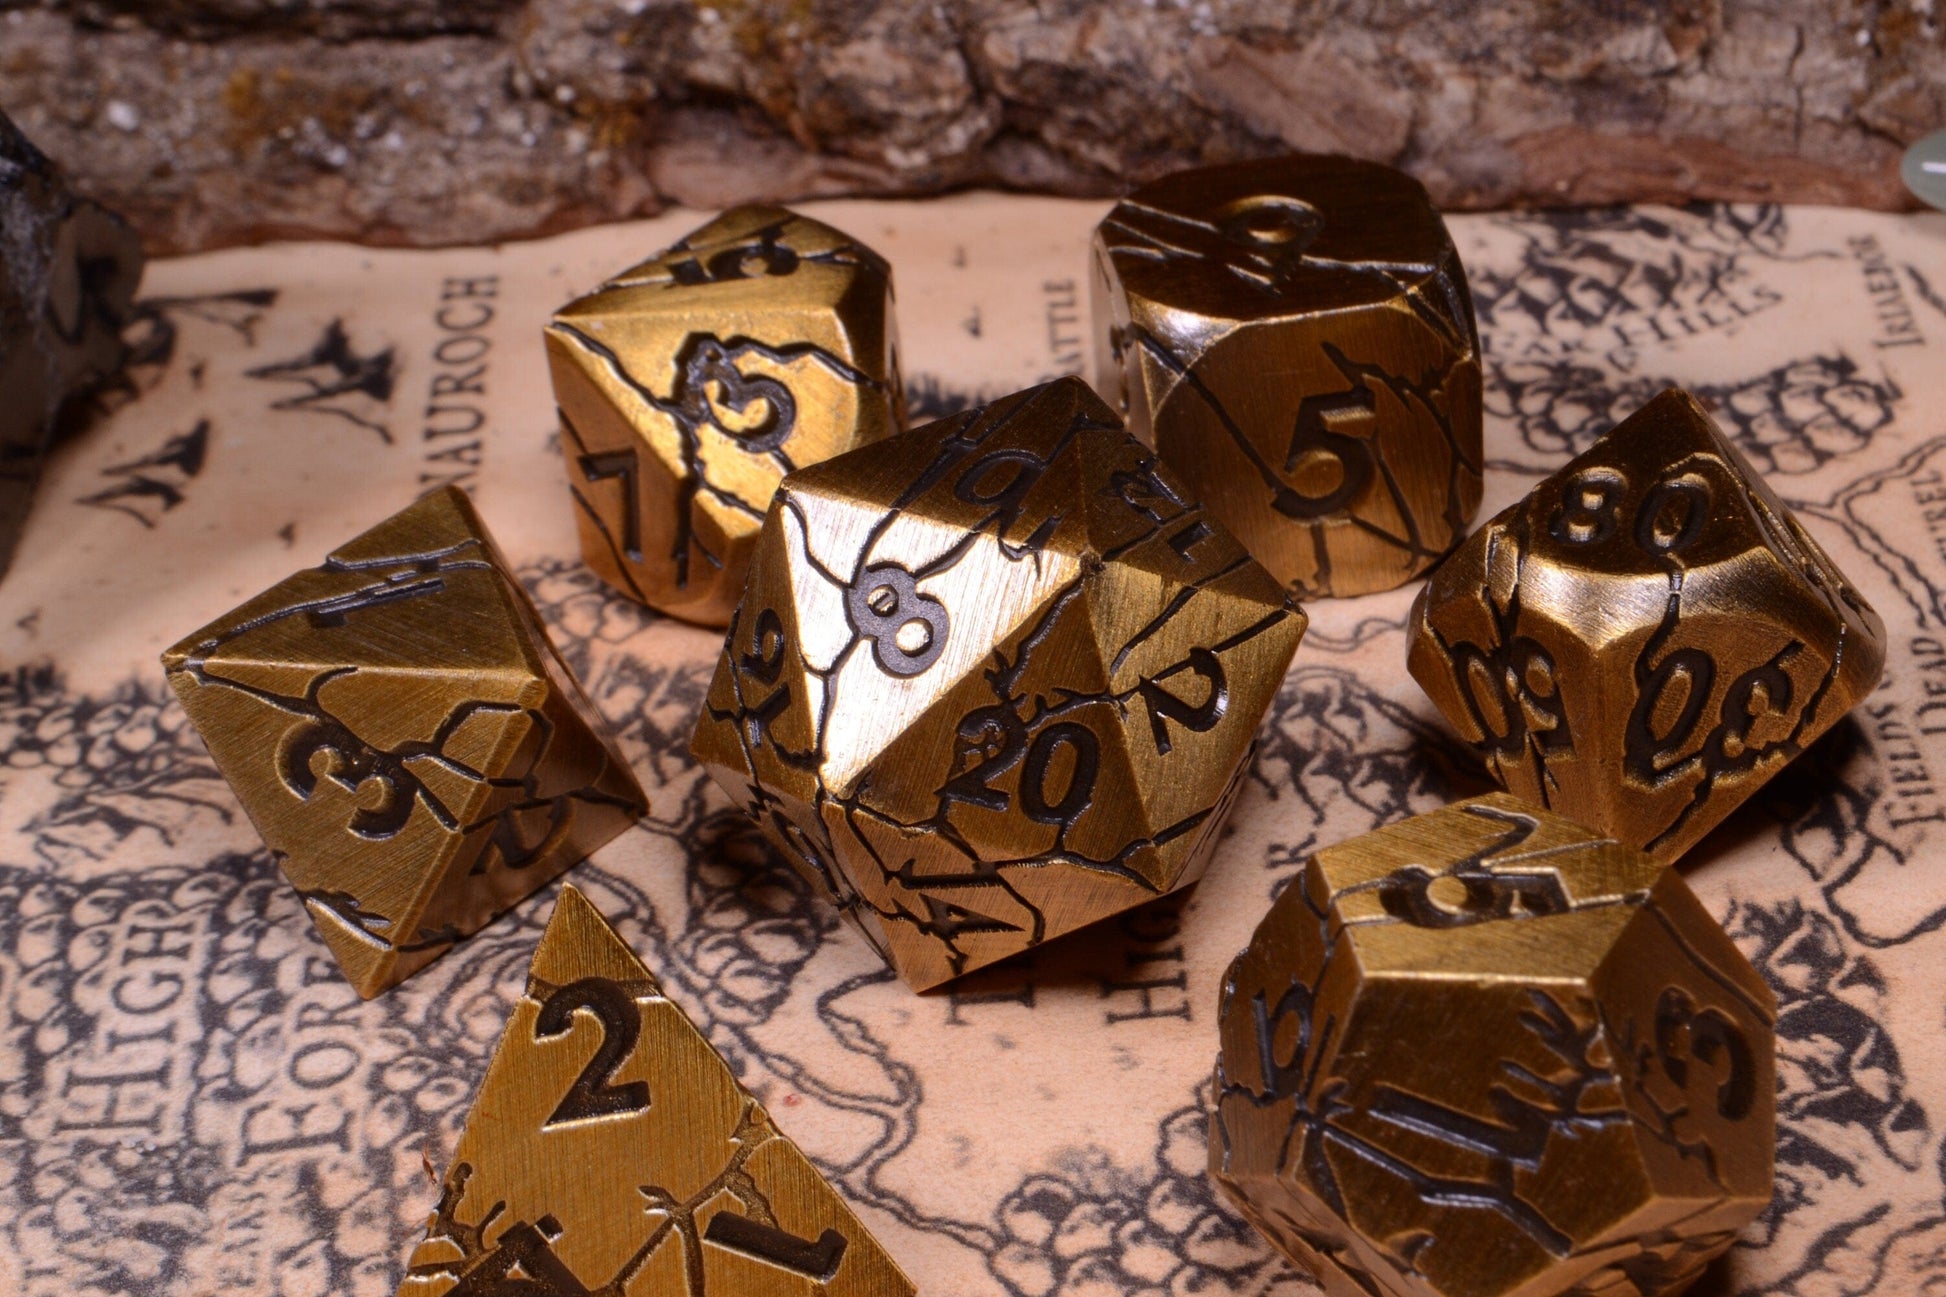 Plated Prisoner - Gold Cracked Metal D&D Dice Set With Engraved Numbering - For Dungeons and Dragons